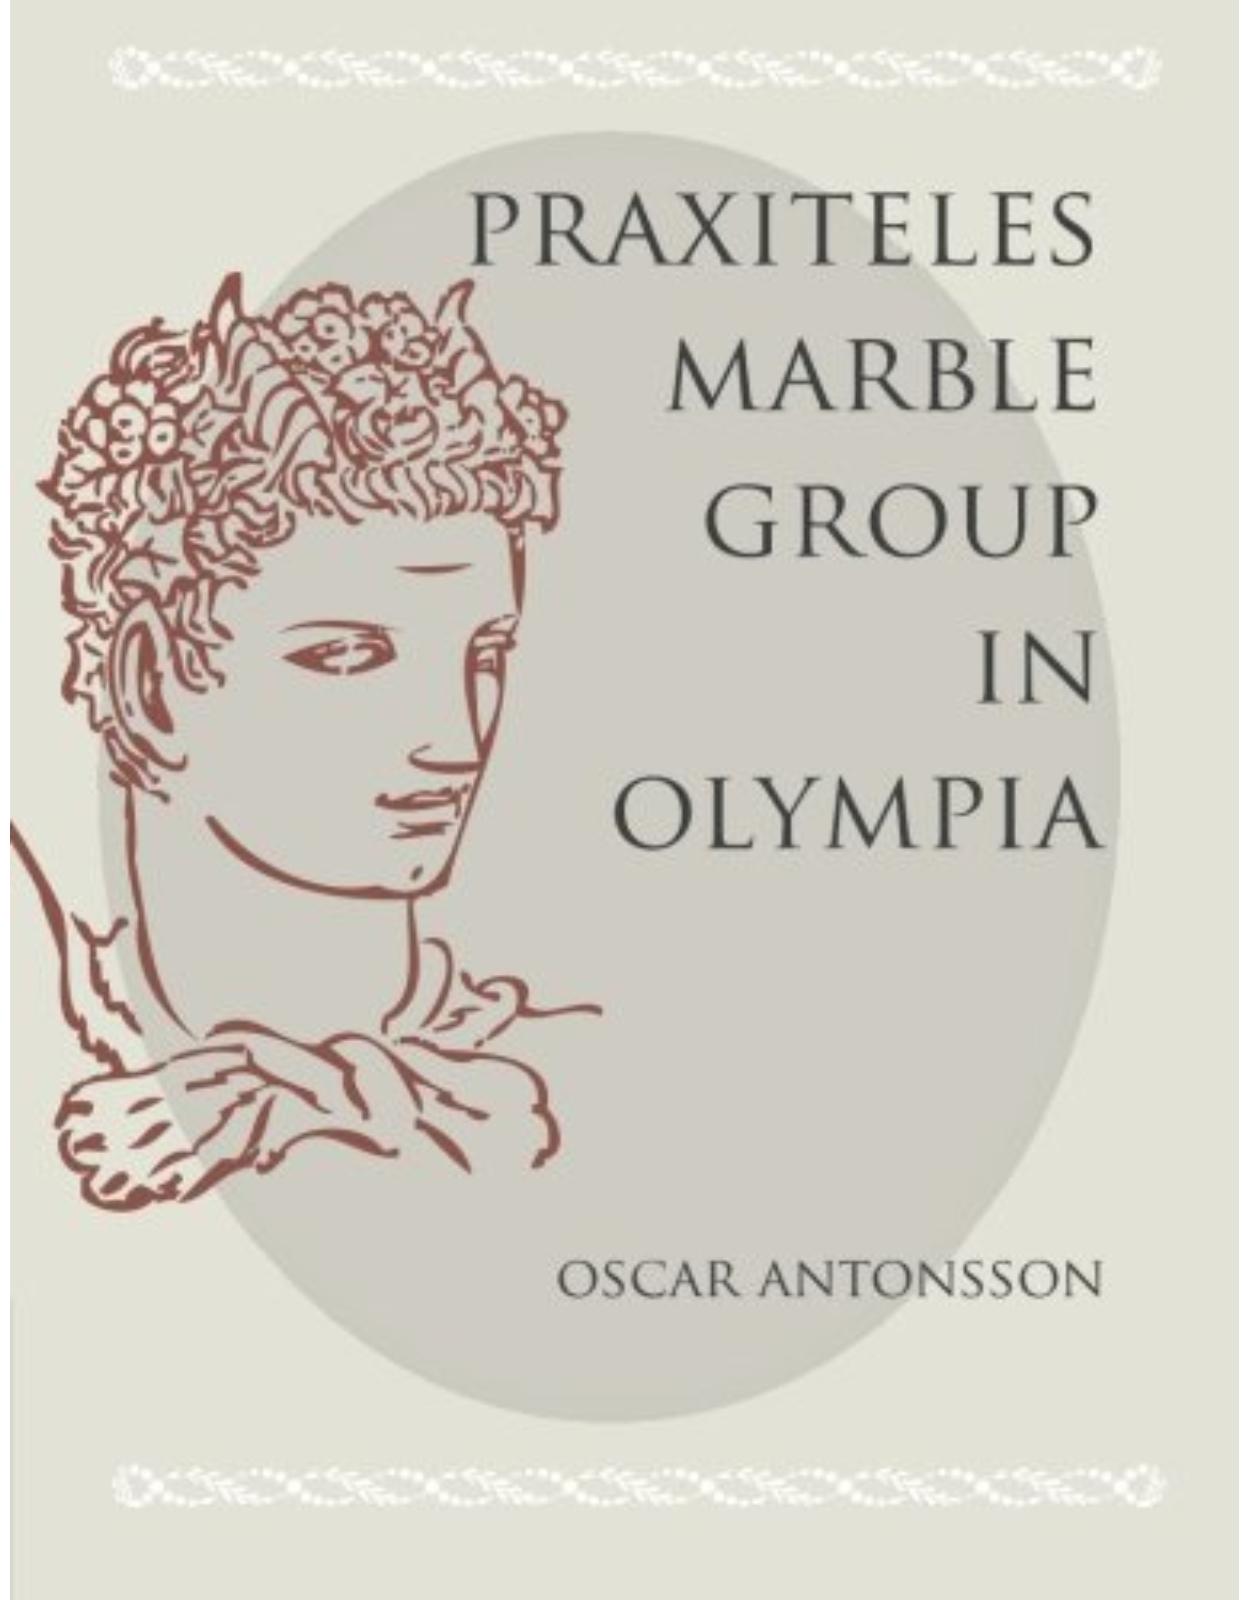 The Praxiteles Marble Group in Olympia